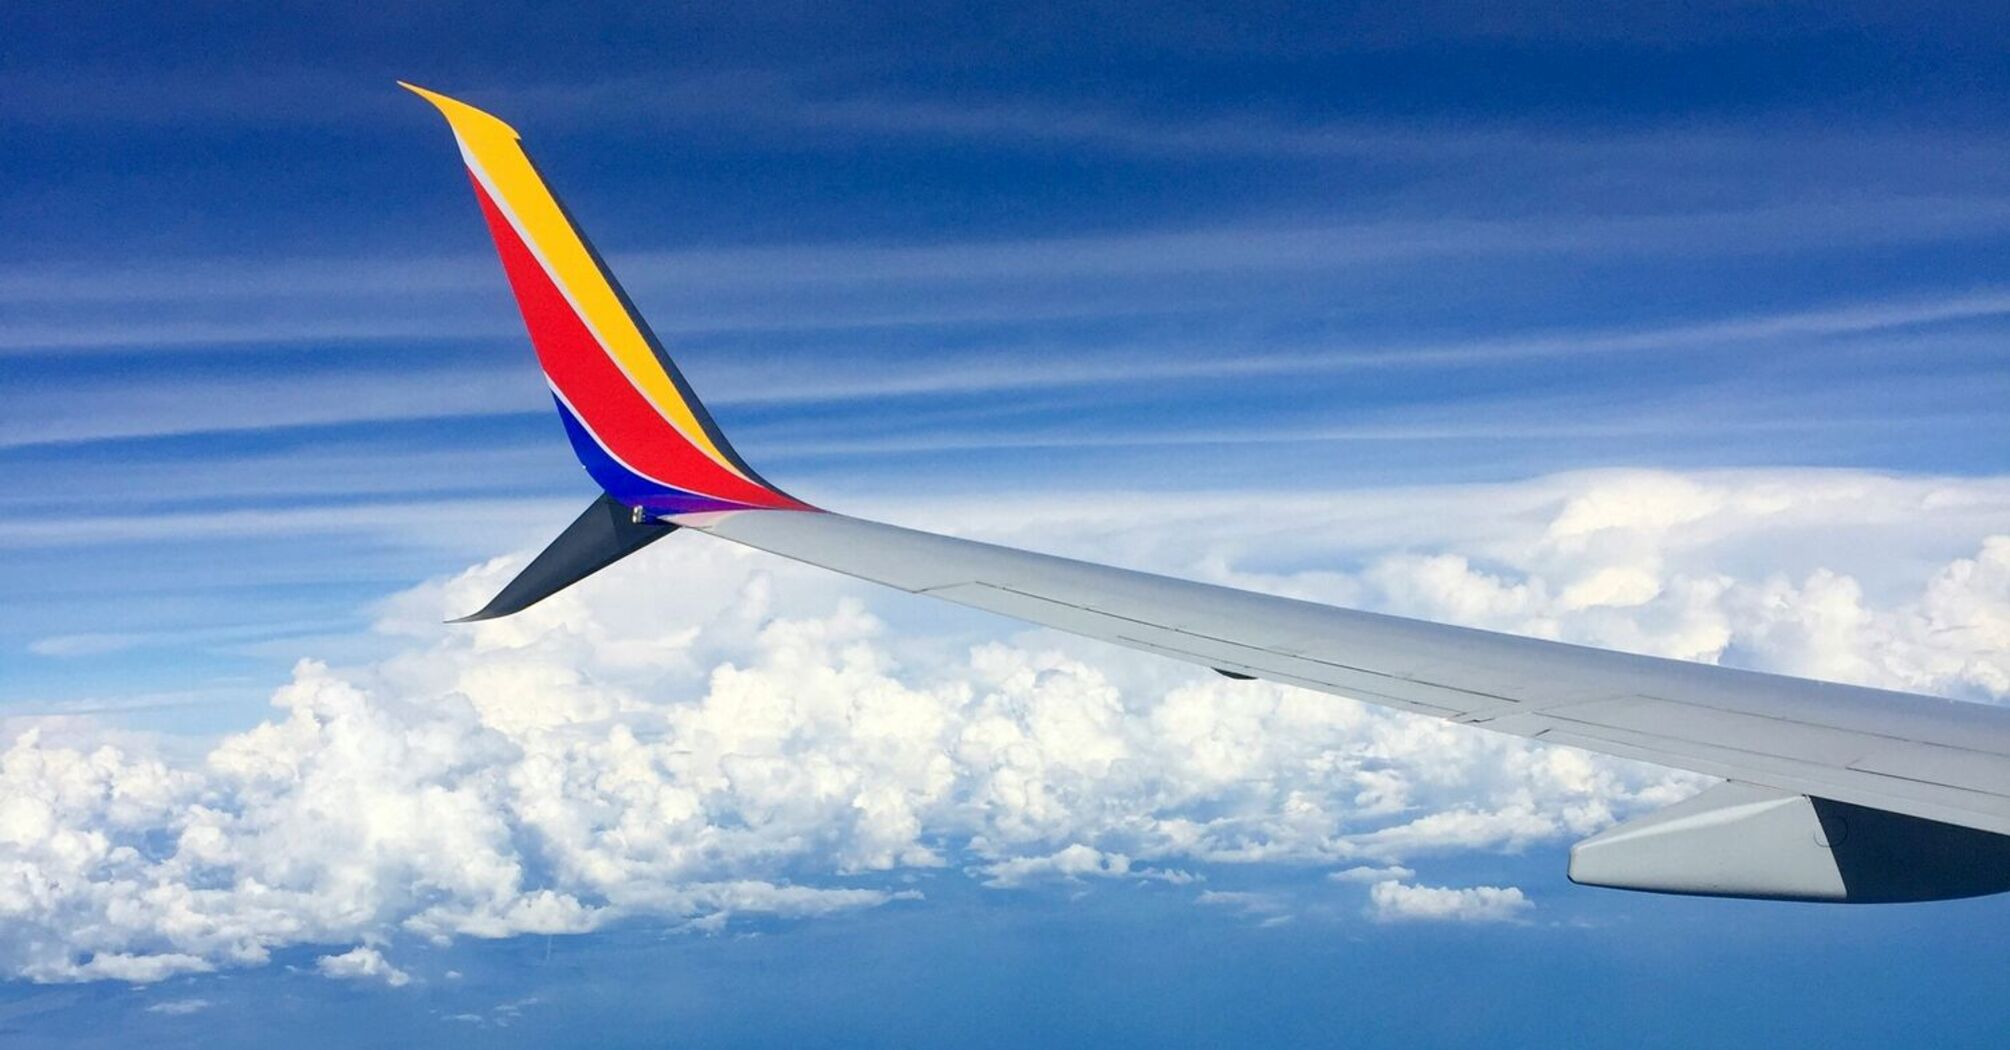 Wing of a Southwest Airlines plane in flight against a backdrop of blue sky and clouds